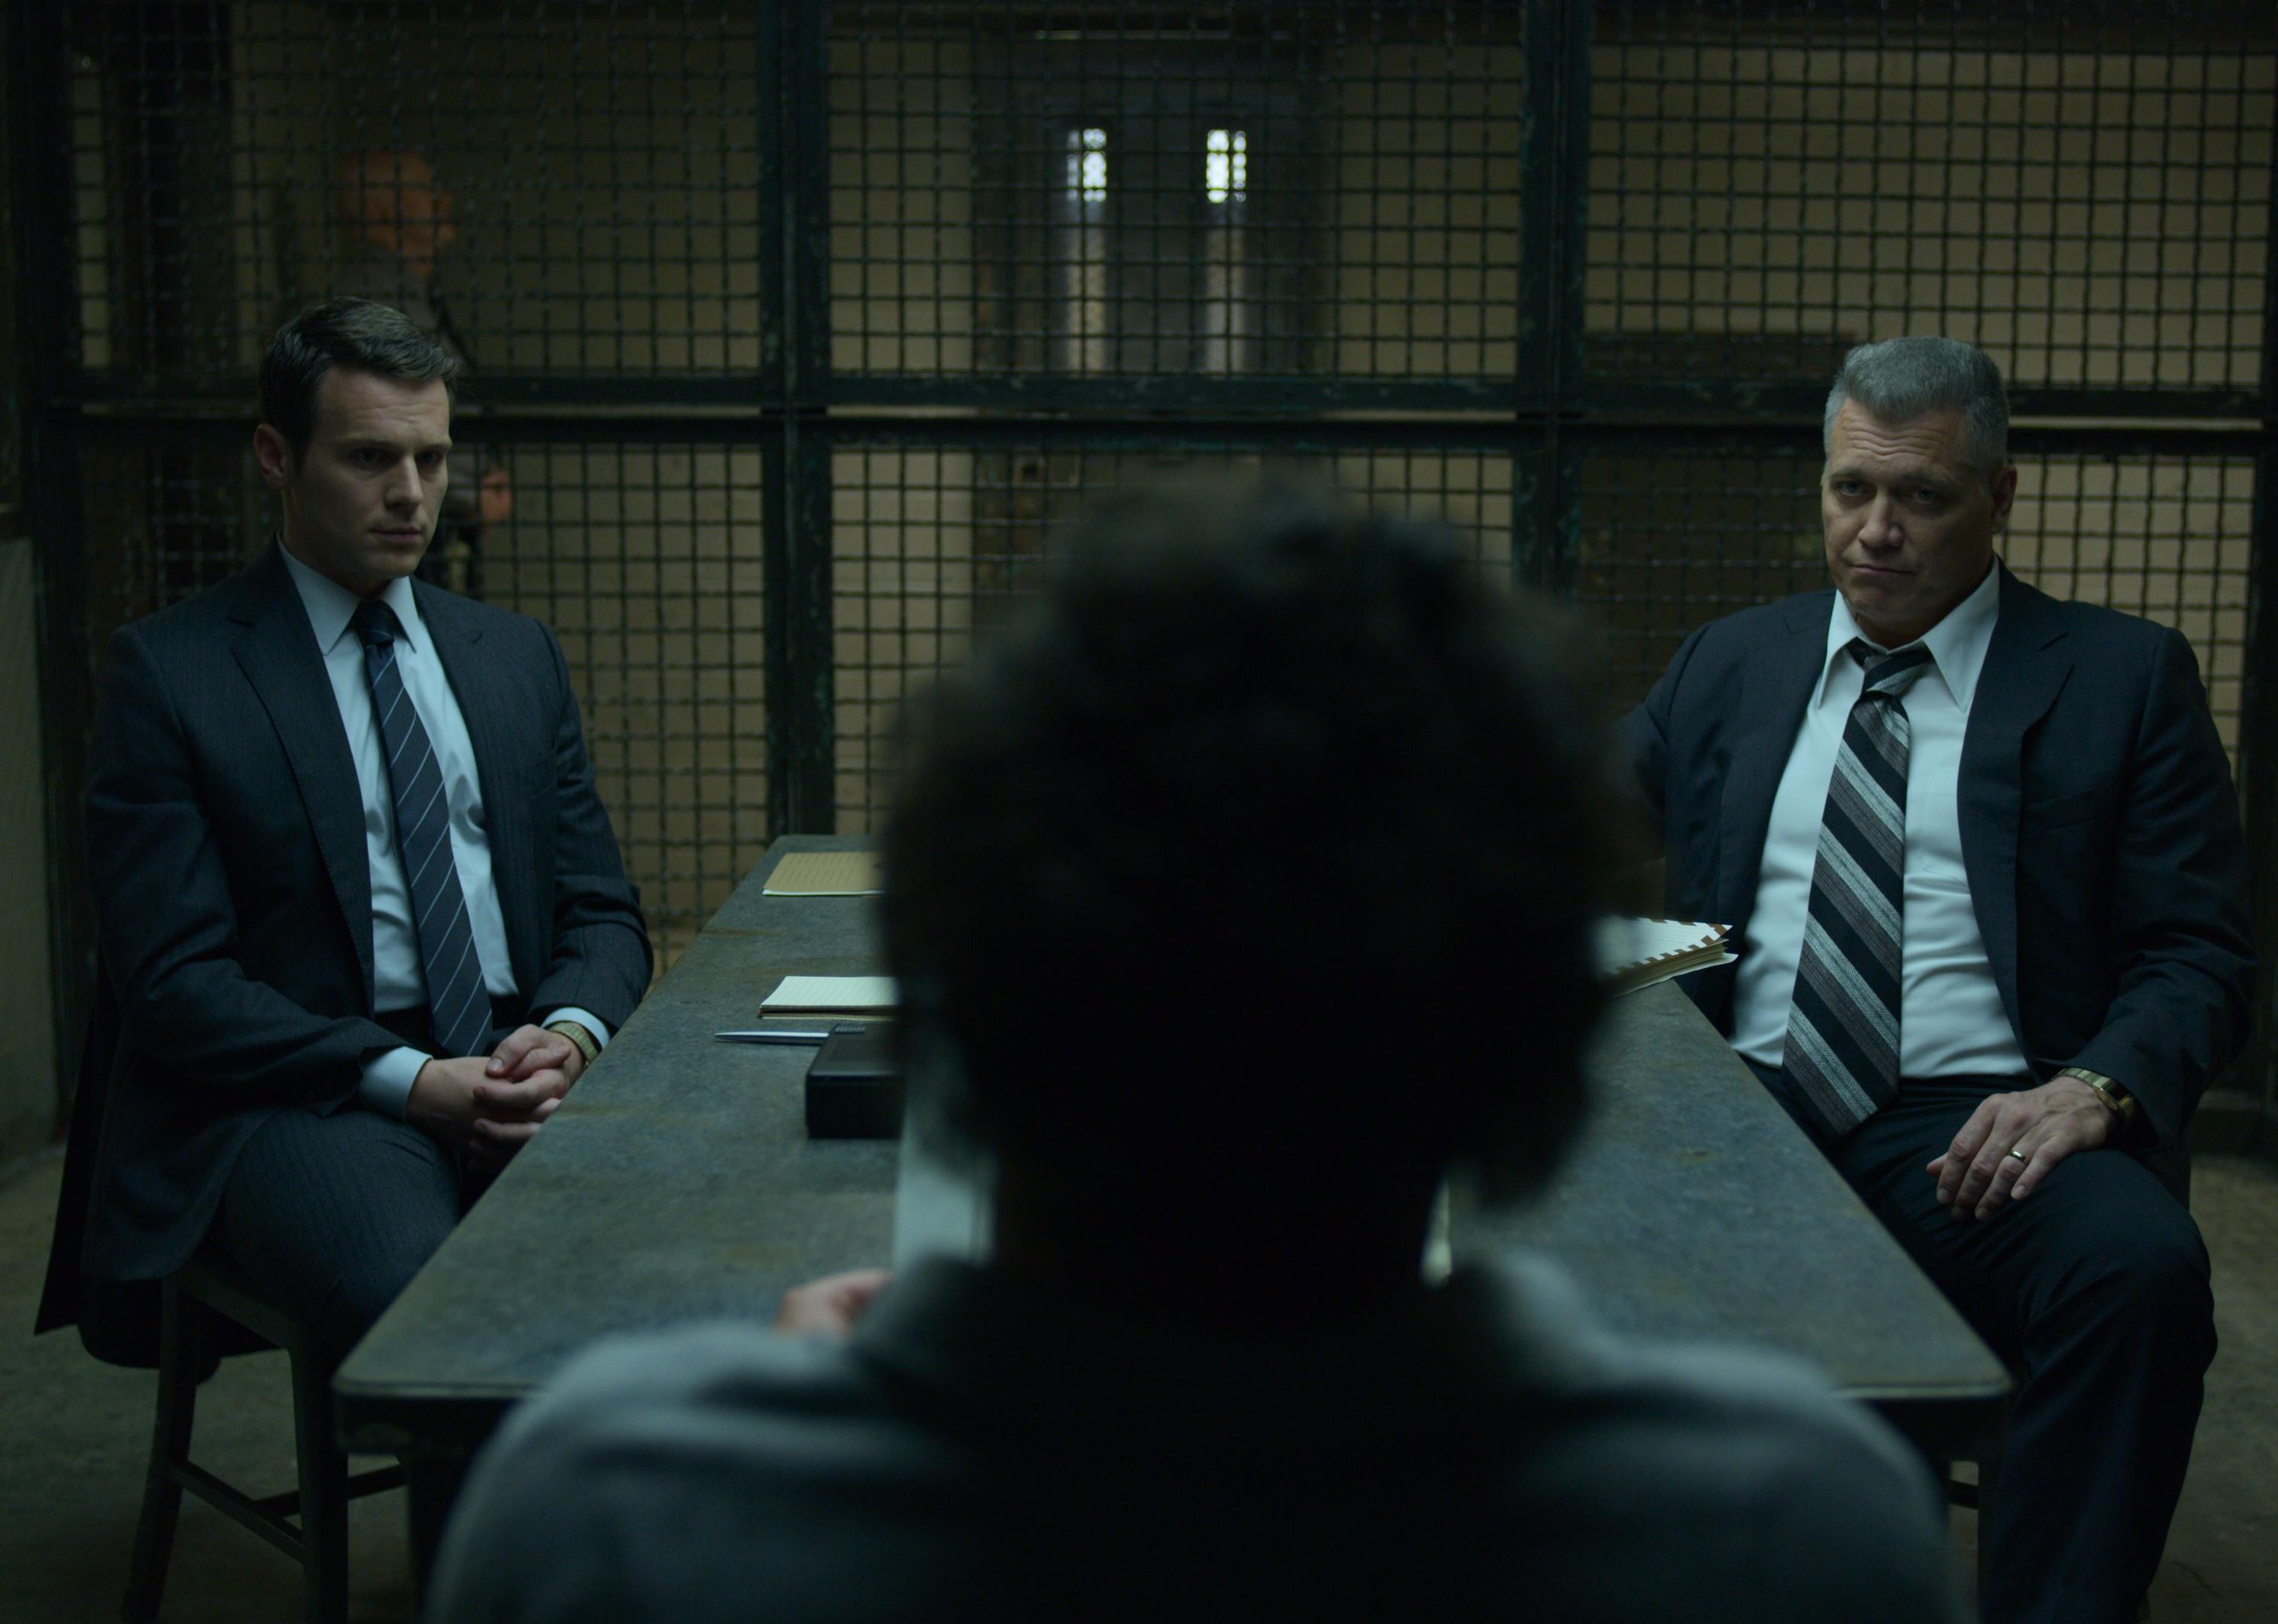 Two men in suits interview a prisoner.